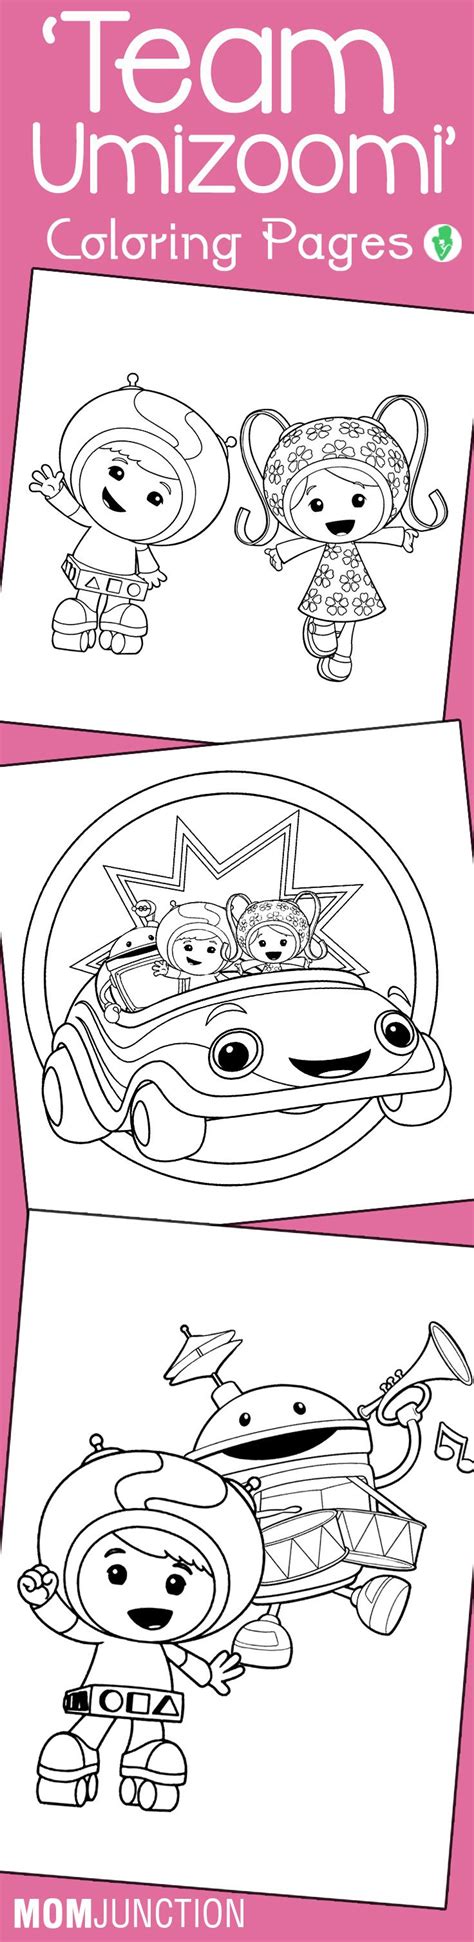 team umizoomi coloring pages   toddler team umizoomi